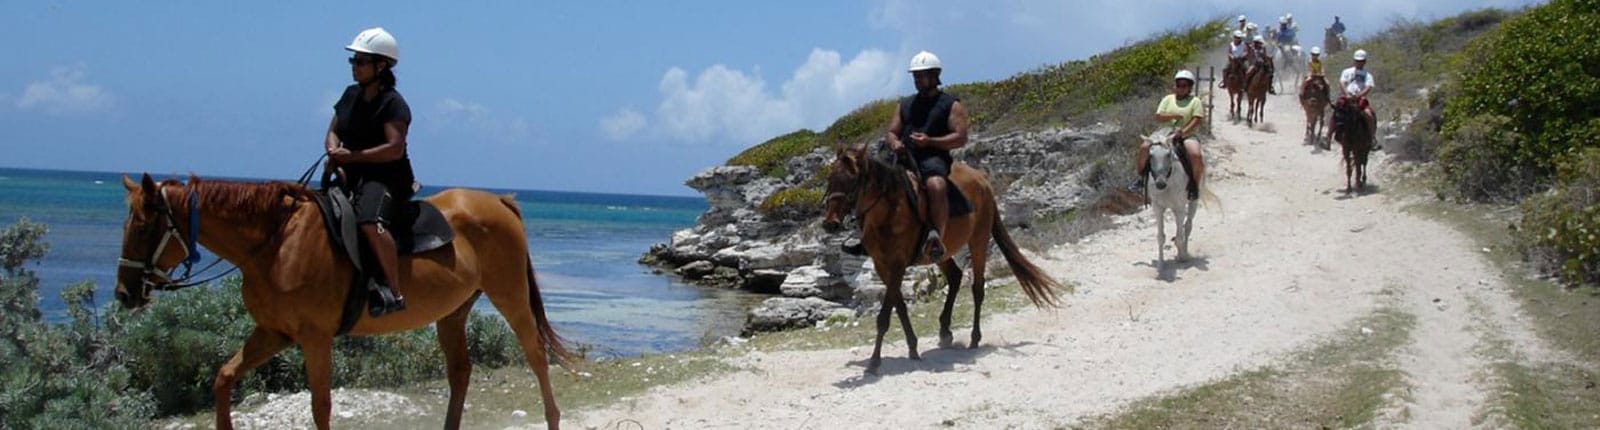 Horseback riding along the trail in Grand Turk